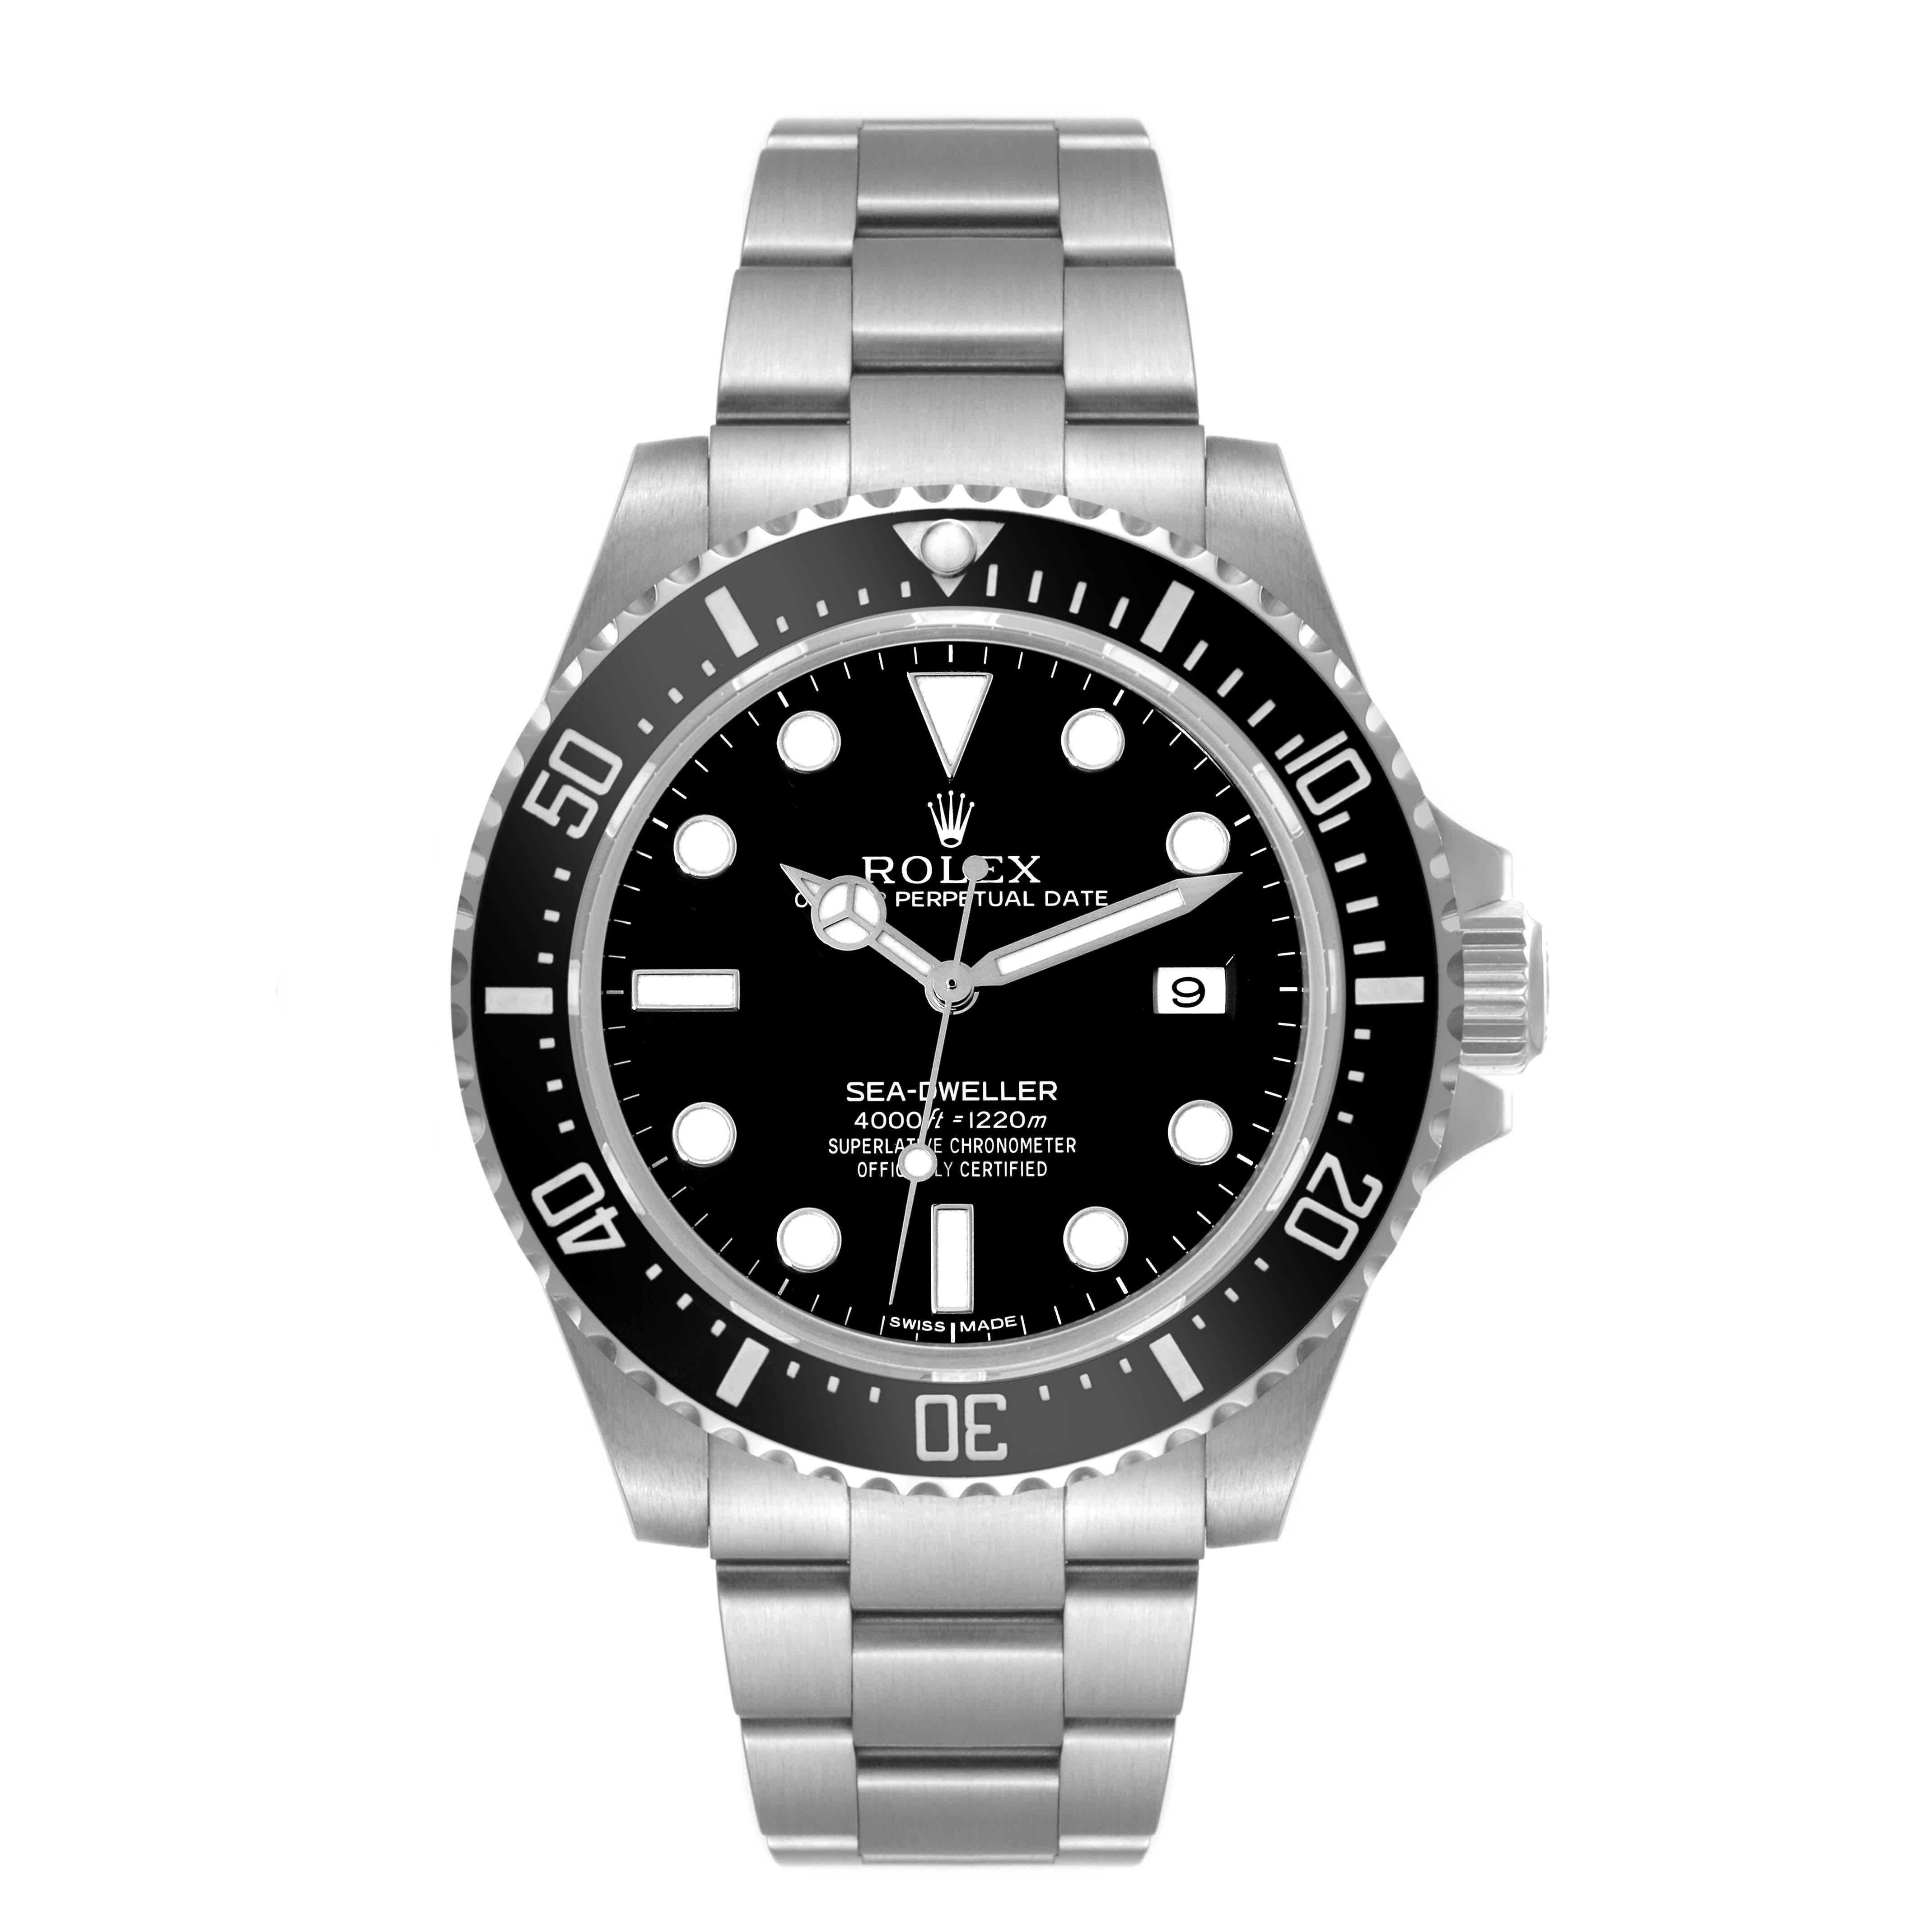 Rolex Seadweller 4000 Automatic Steel Mens Watch 116600 Box Card. Officially certified chronometer self-winding movement. Stainless steel oyster case 40.0 mm in diameter. Rolex logo on a crown. Ceramic unidirectional rotating bezel. Scratch